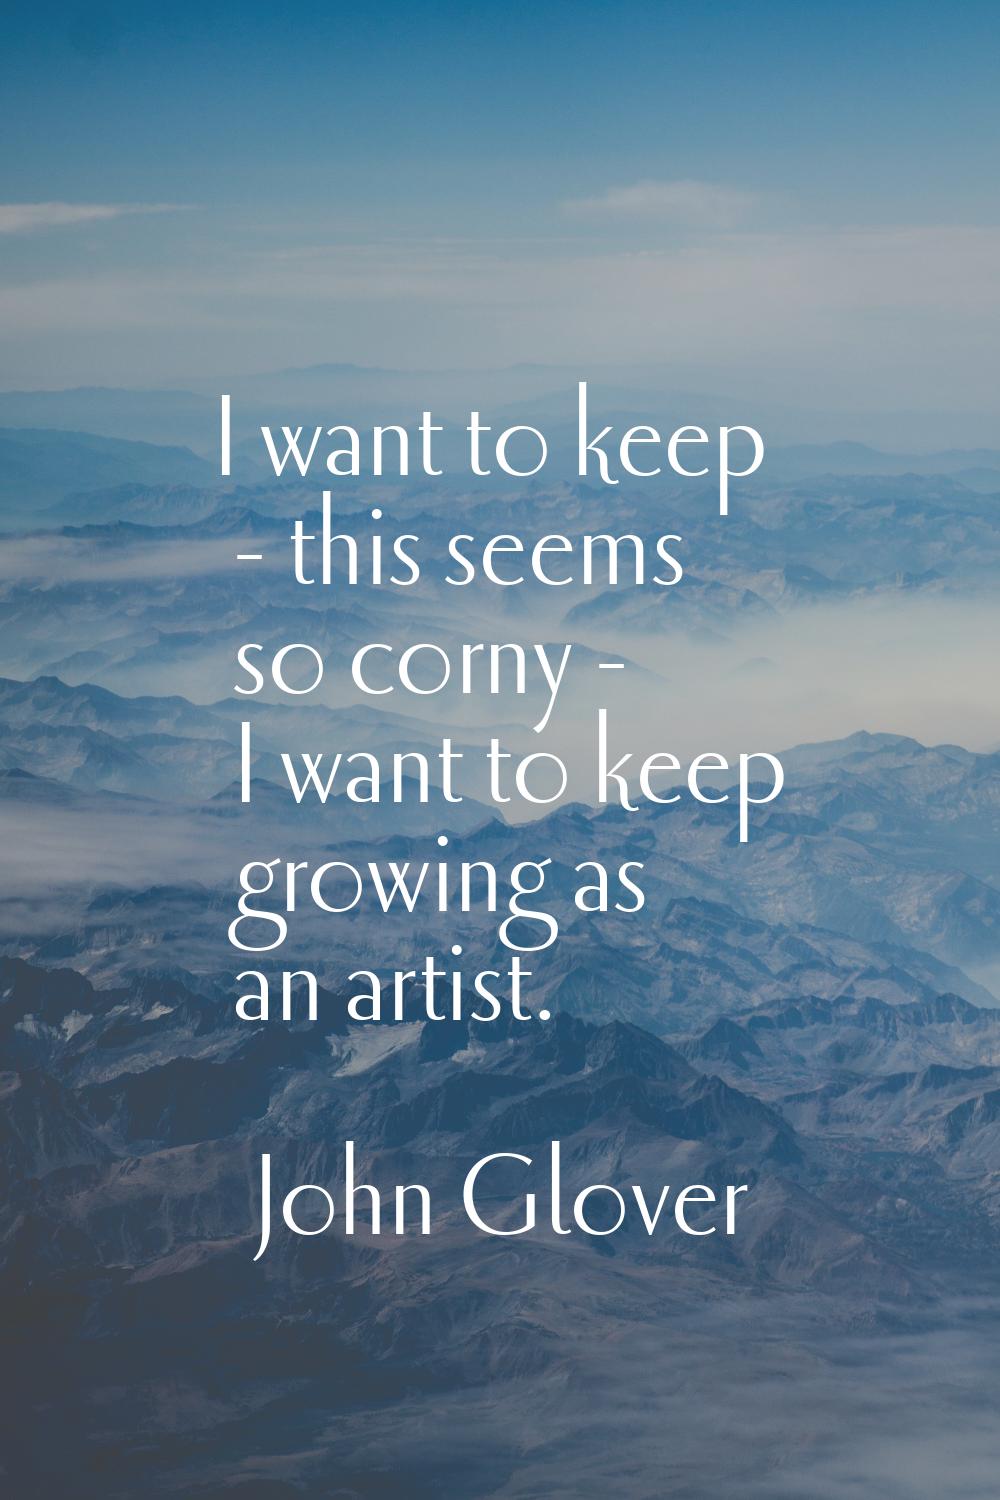 I want to keep - this seems so corny - I want to keep growing as an artist.